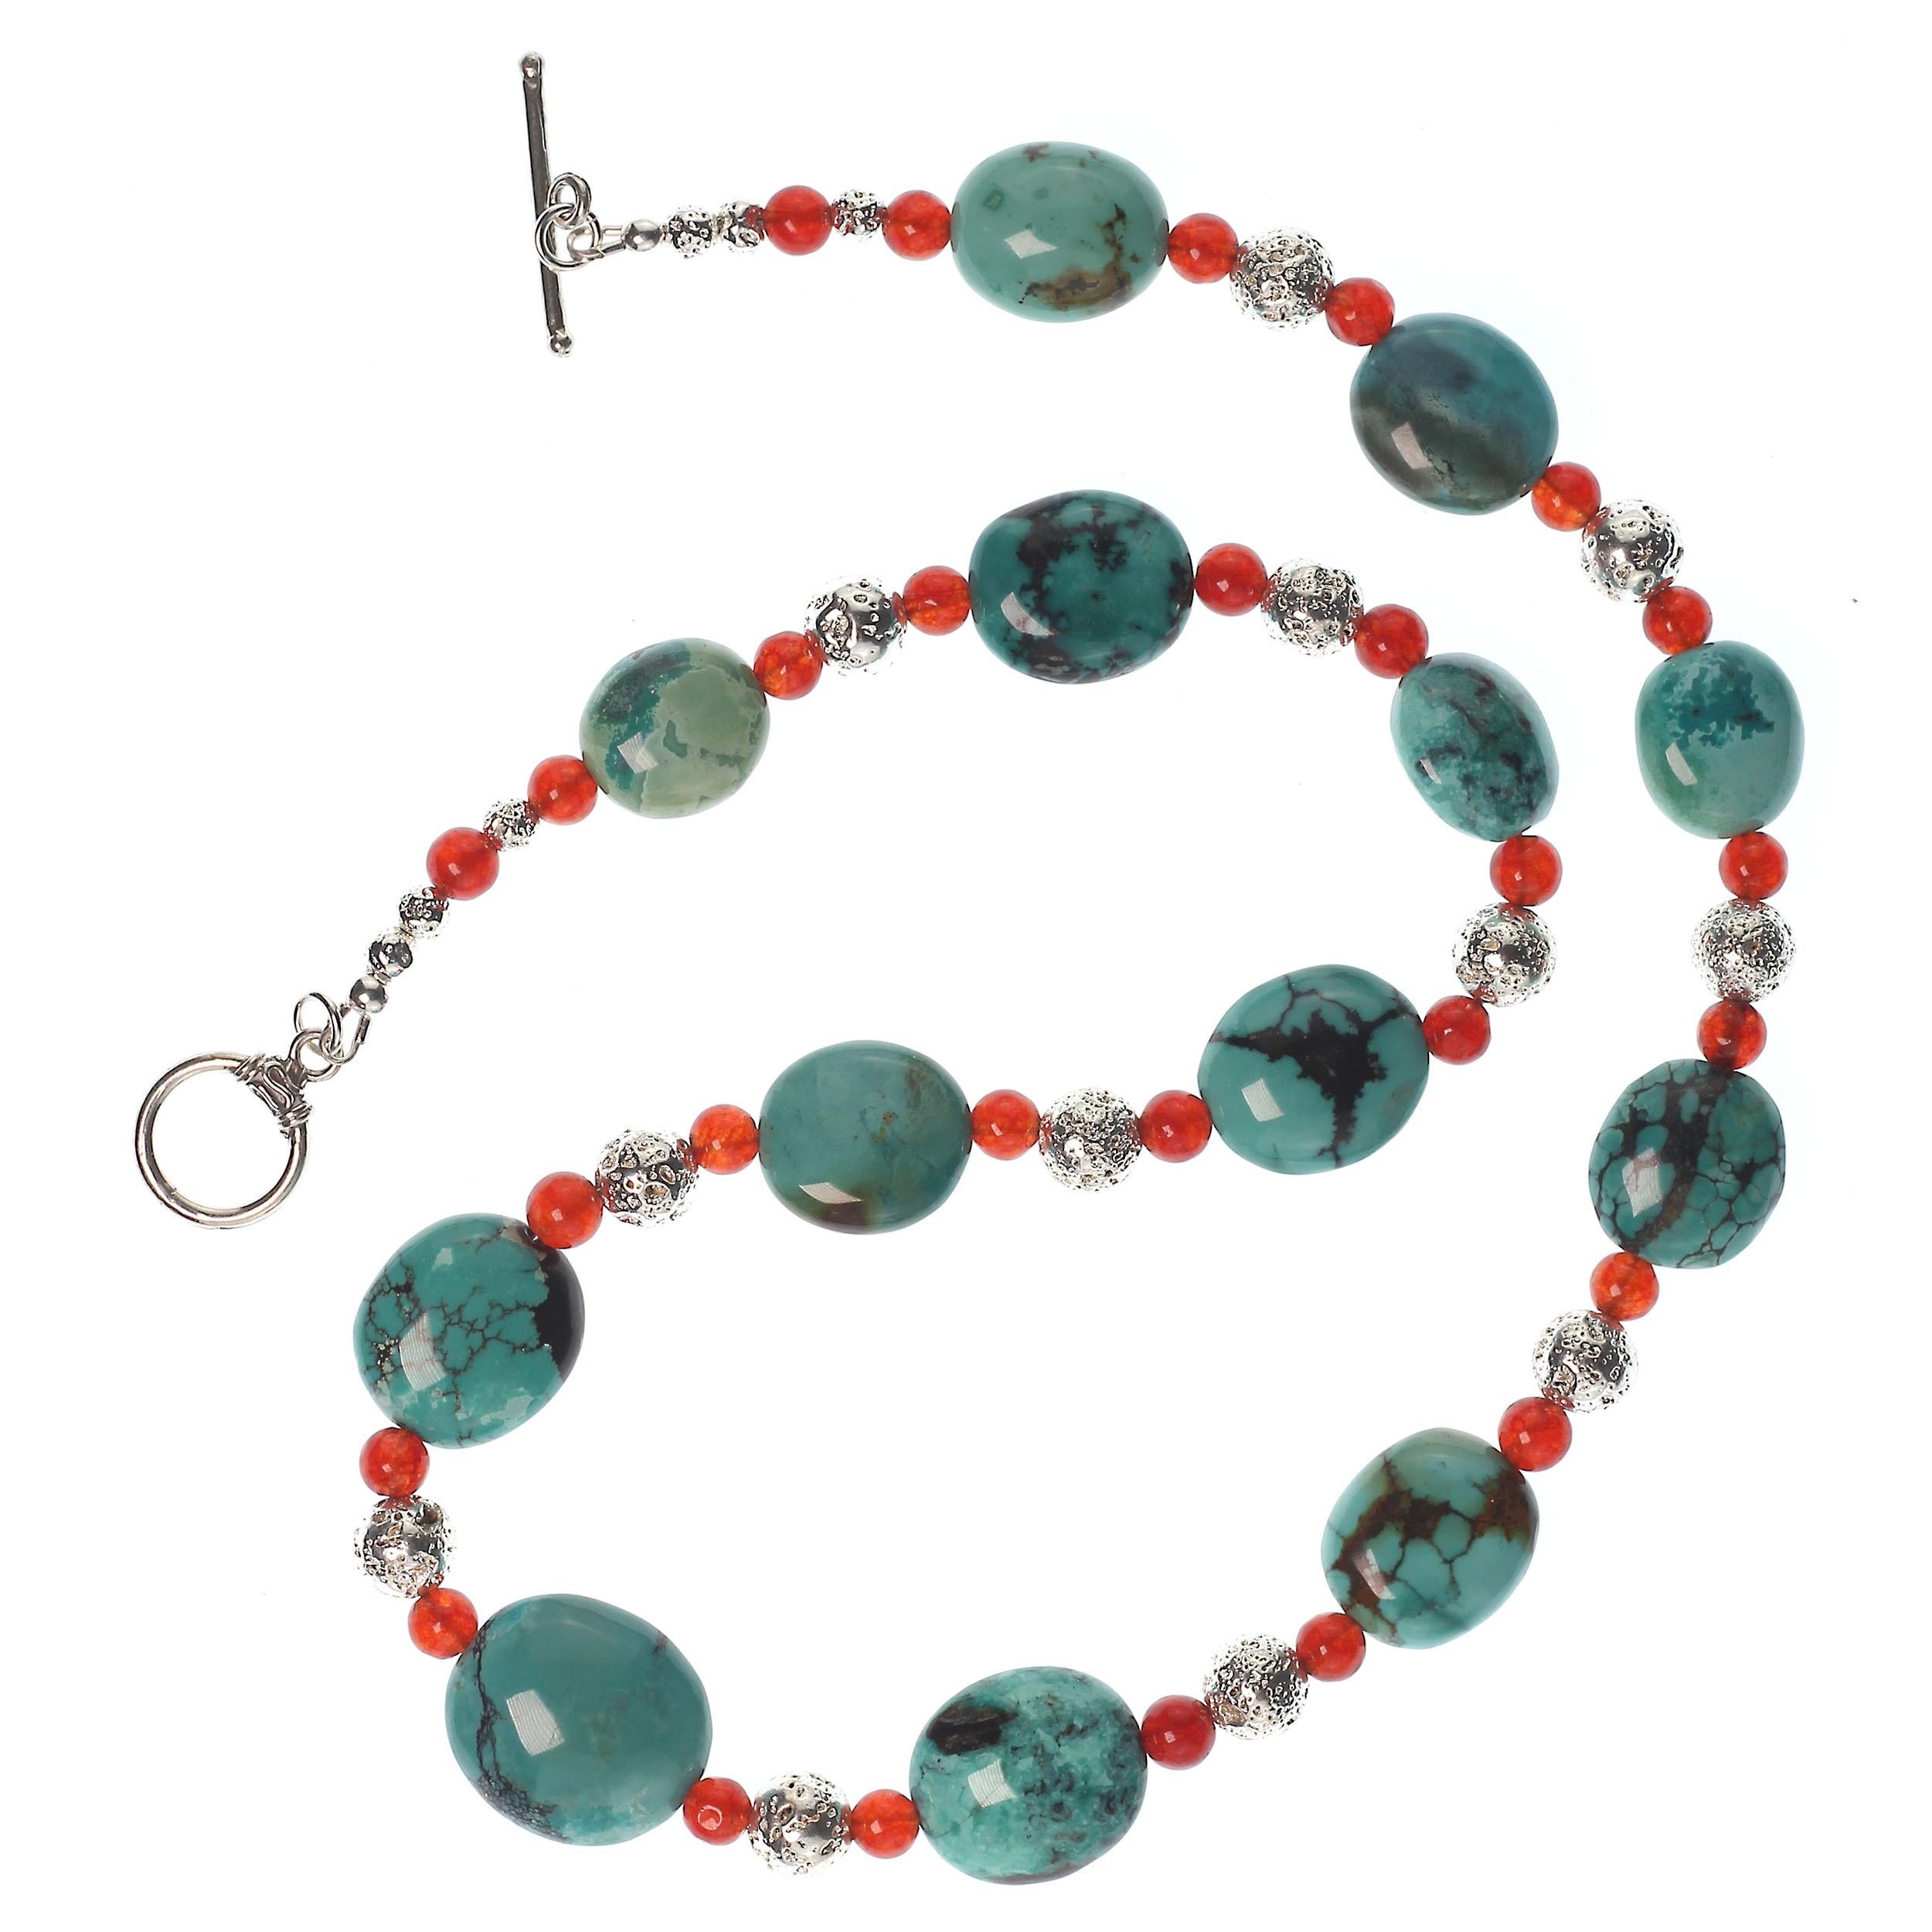 Artisan AJD 22 Inch Southwest Influence Necklace of Turquoise, Carnelian, and Silver For Sale